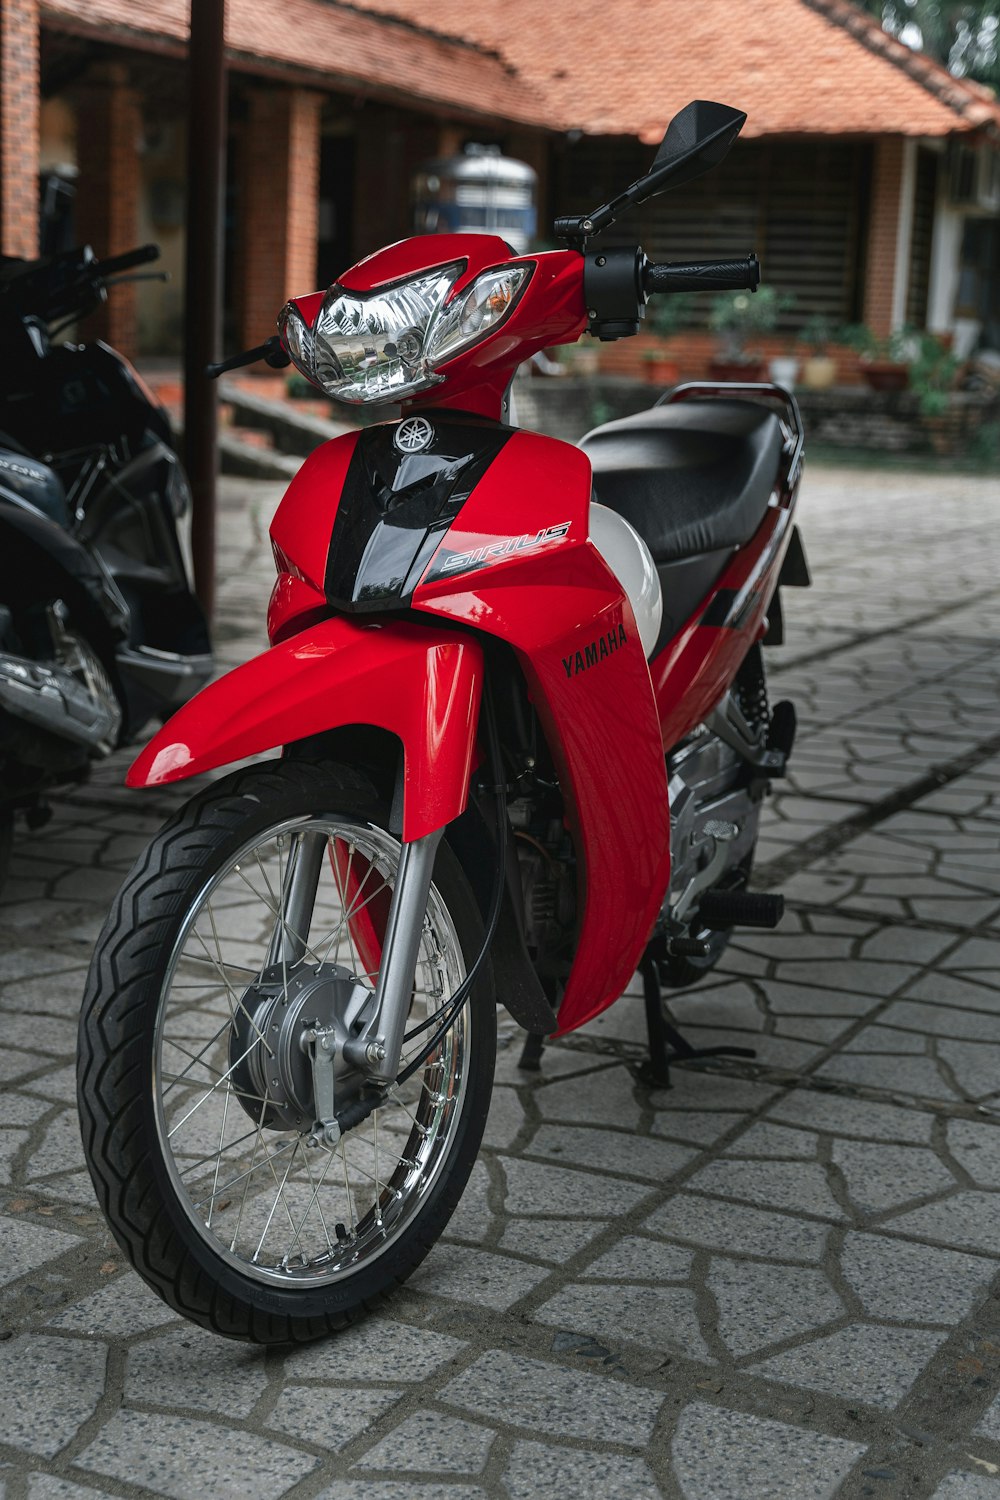 a red motorcycle is parked on a cobblestone street